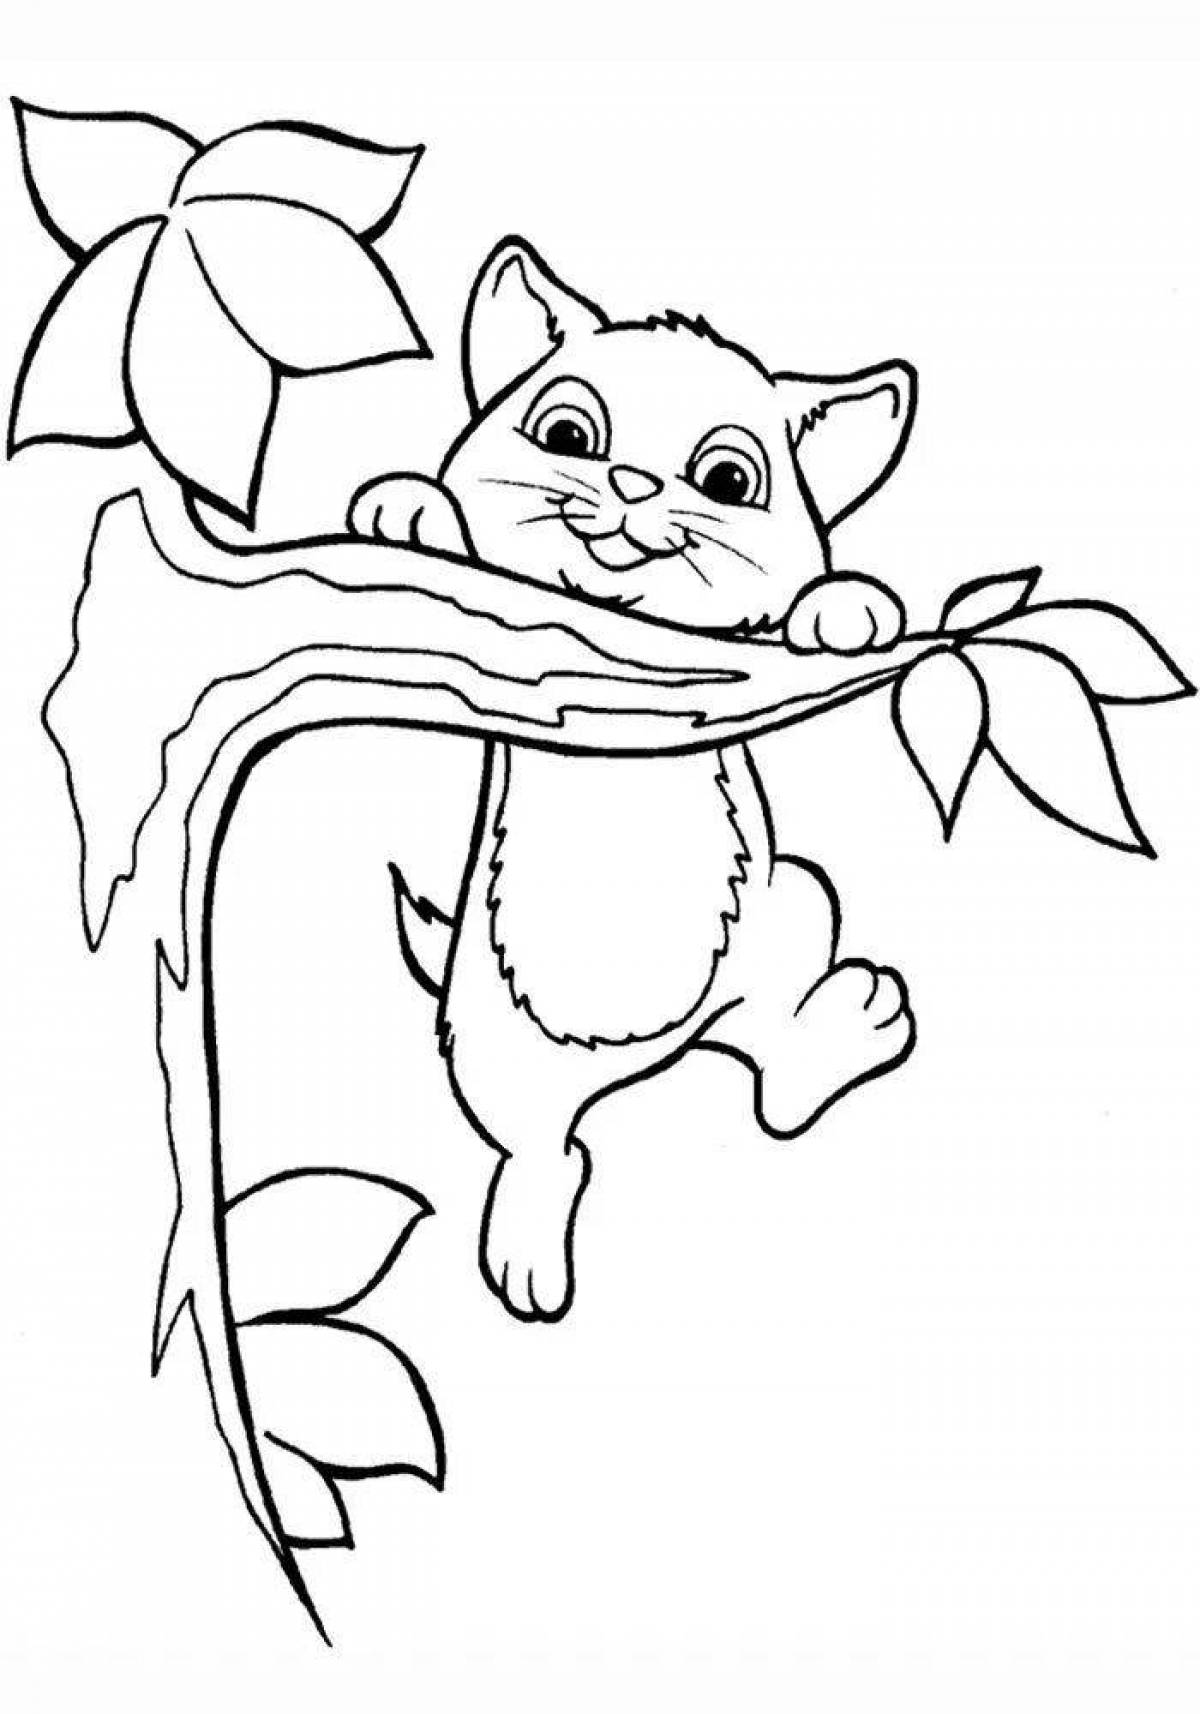 Outstanding kitten coloring book for 5-6 year olds